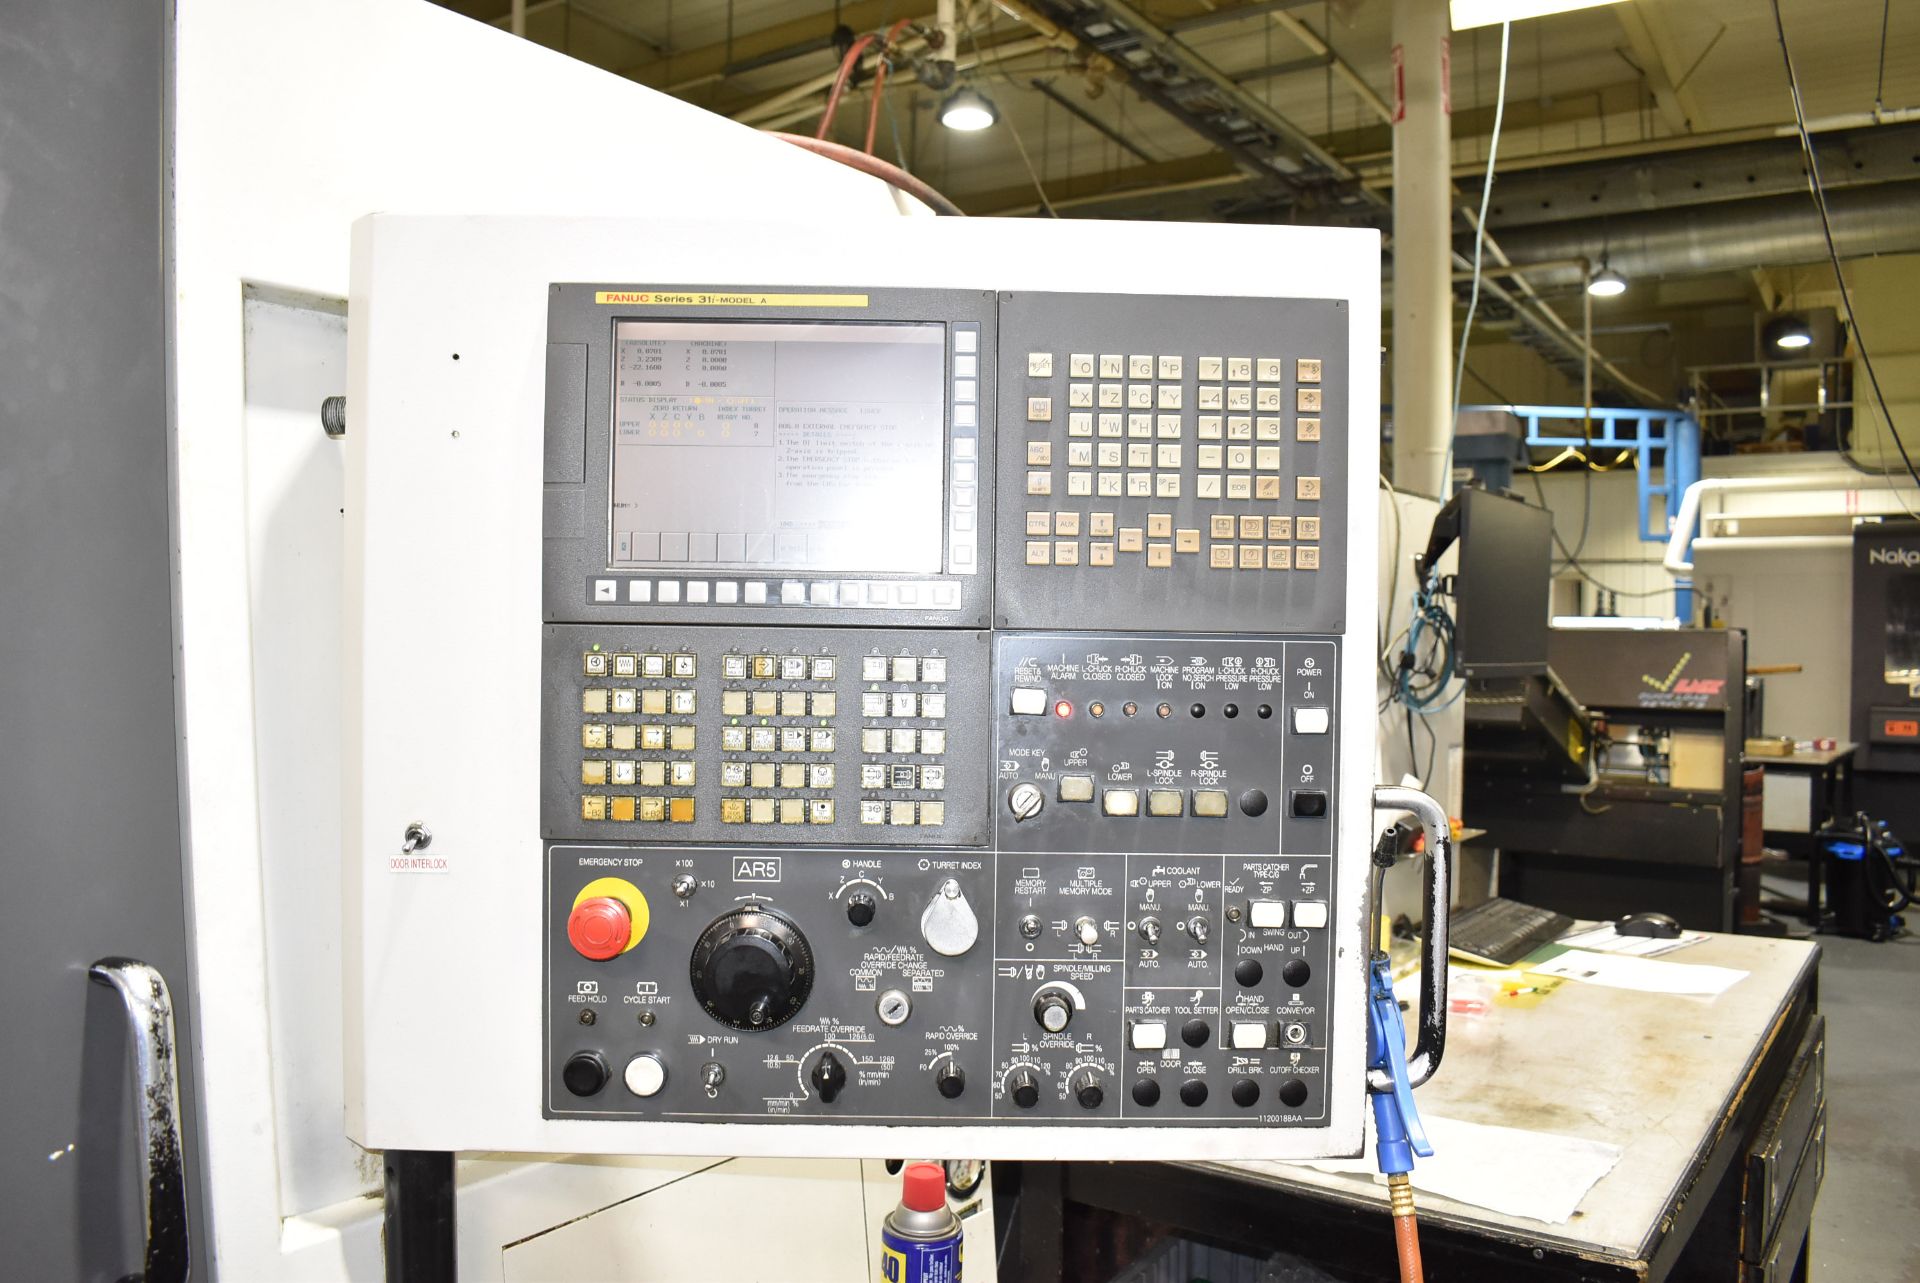 NAKAMURA-TOME WT-100 MULTI-AXIS OPPOSED SPINDLE AND TWIN TURRET CNC MULTI-TASKING CENTER WITH - Image 8 of 17